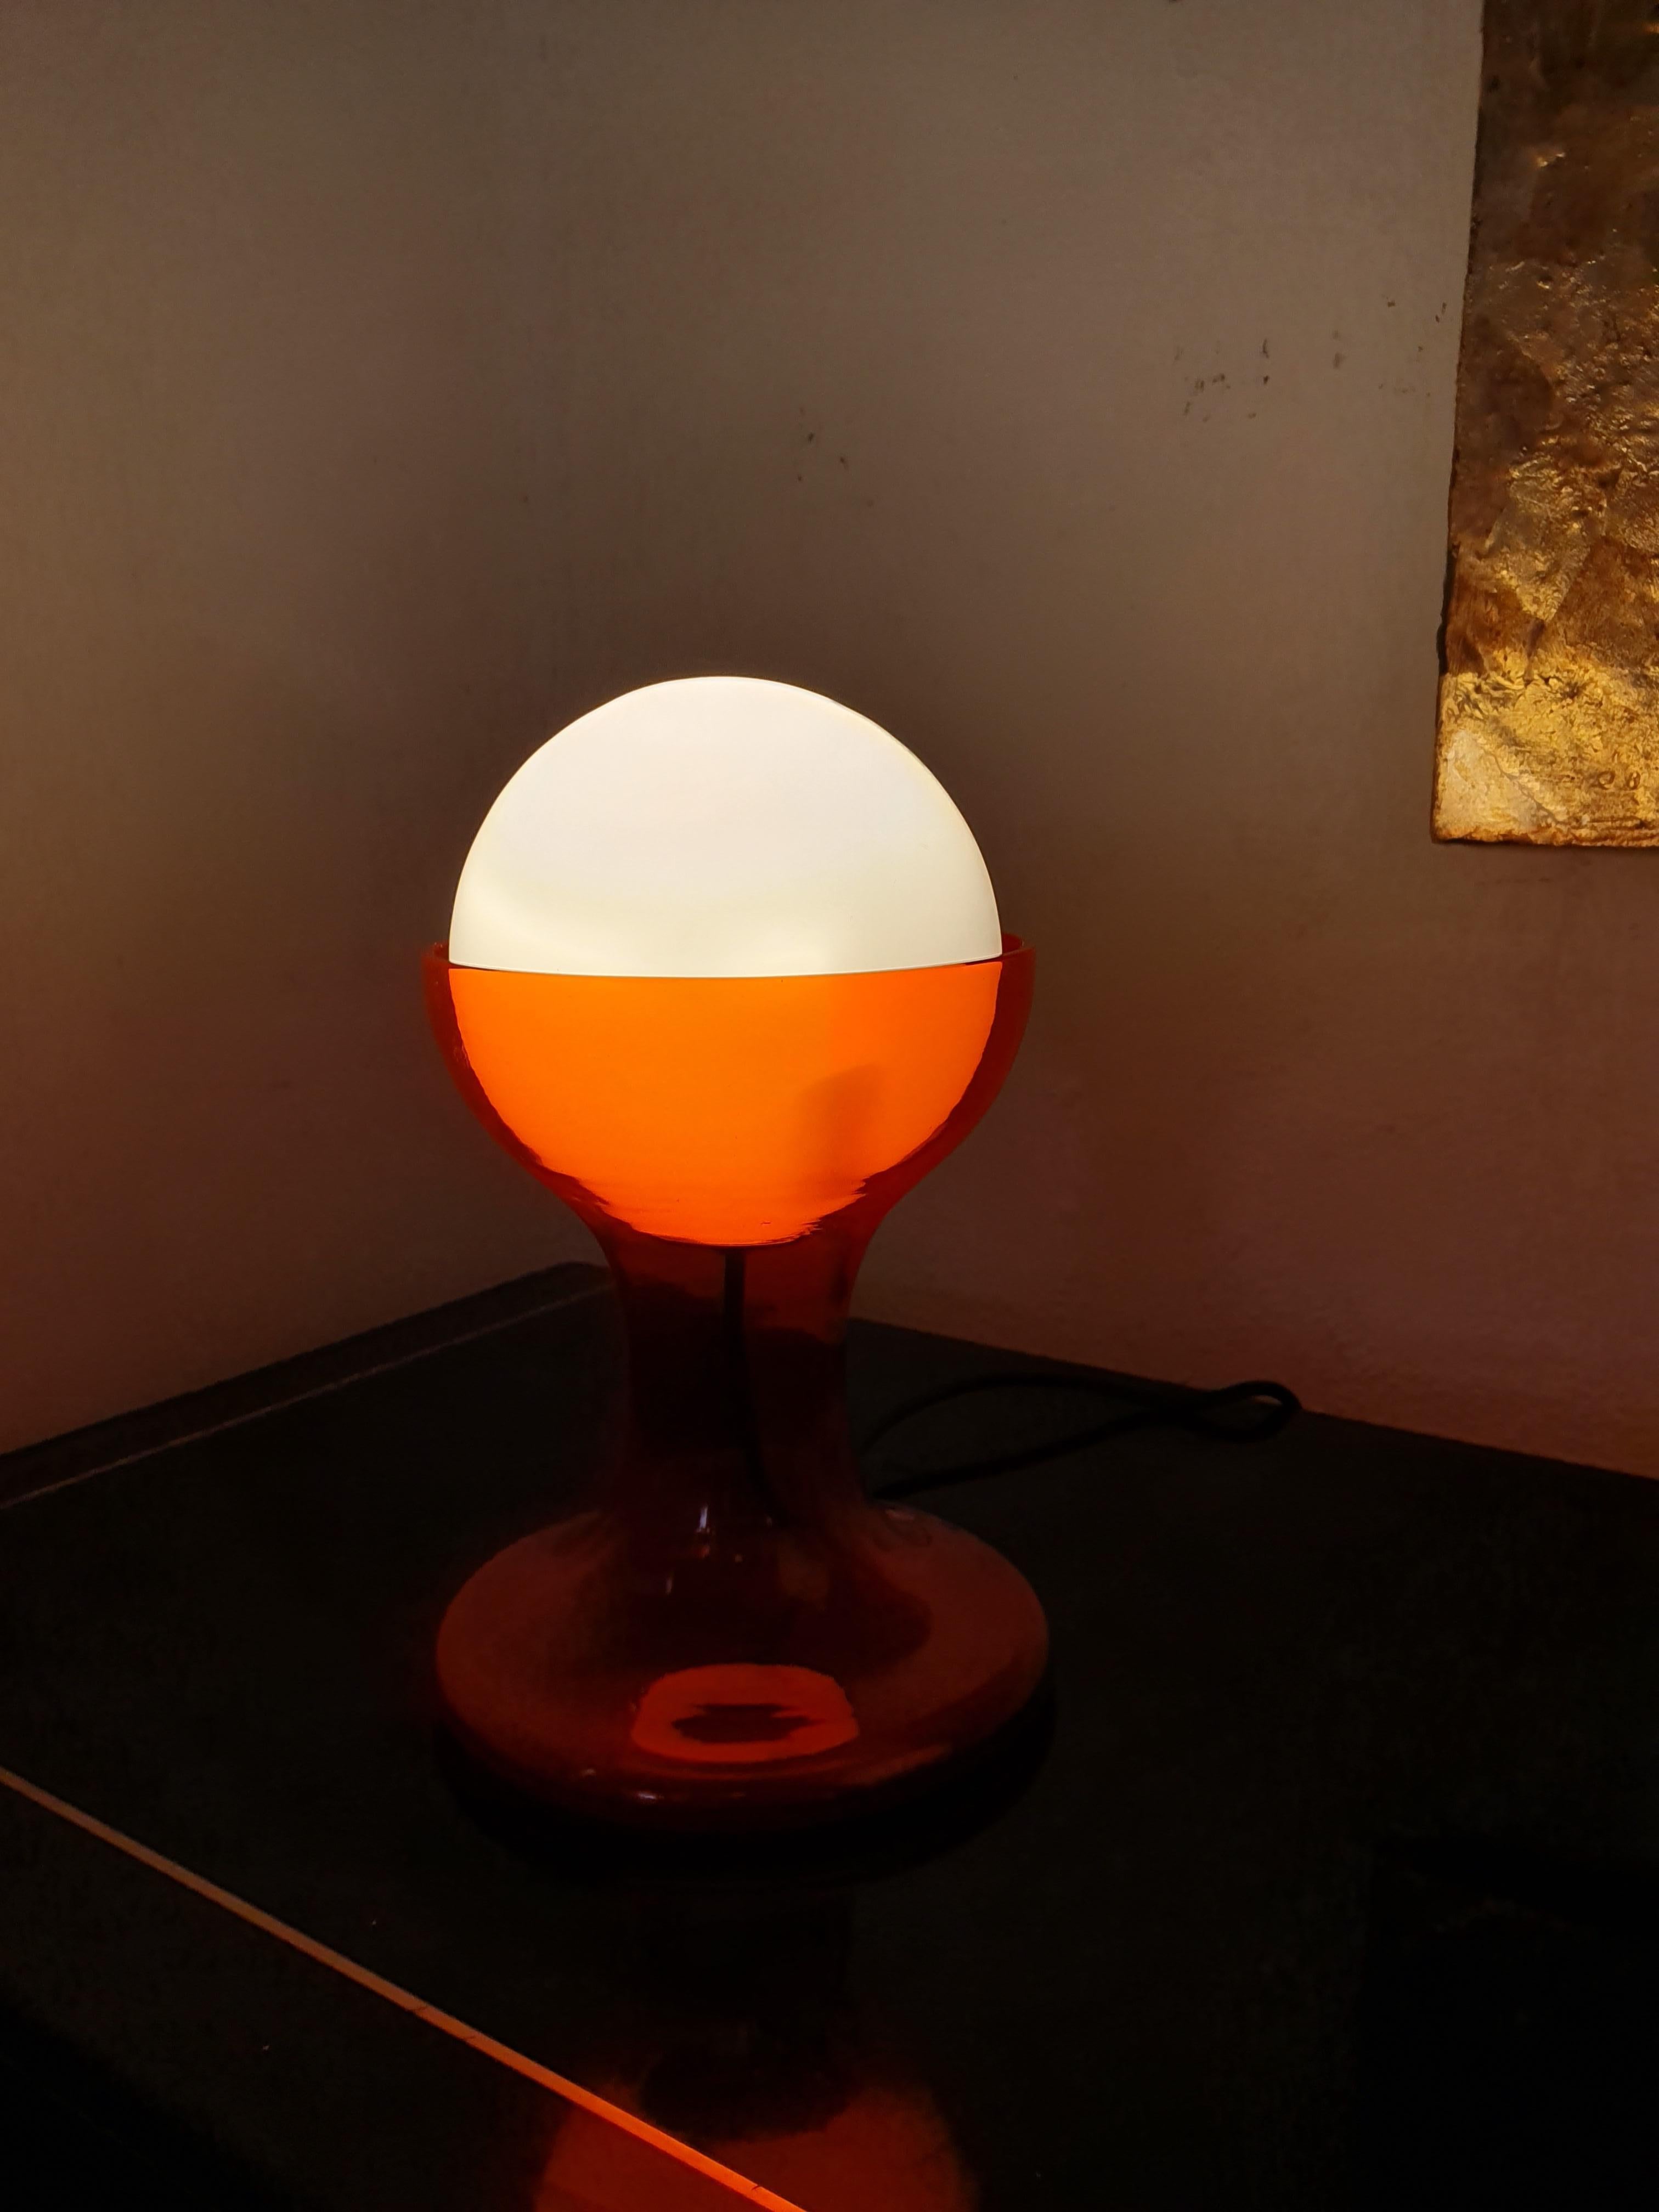 Space Age, LT216 model, one-light table lamp designed by Carlo Nason for Mazzega, in red and white Murano glass.
Made in Italy, circa 1970.
